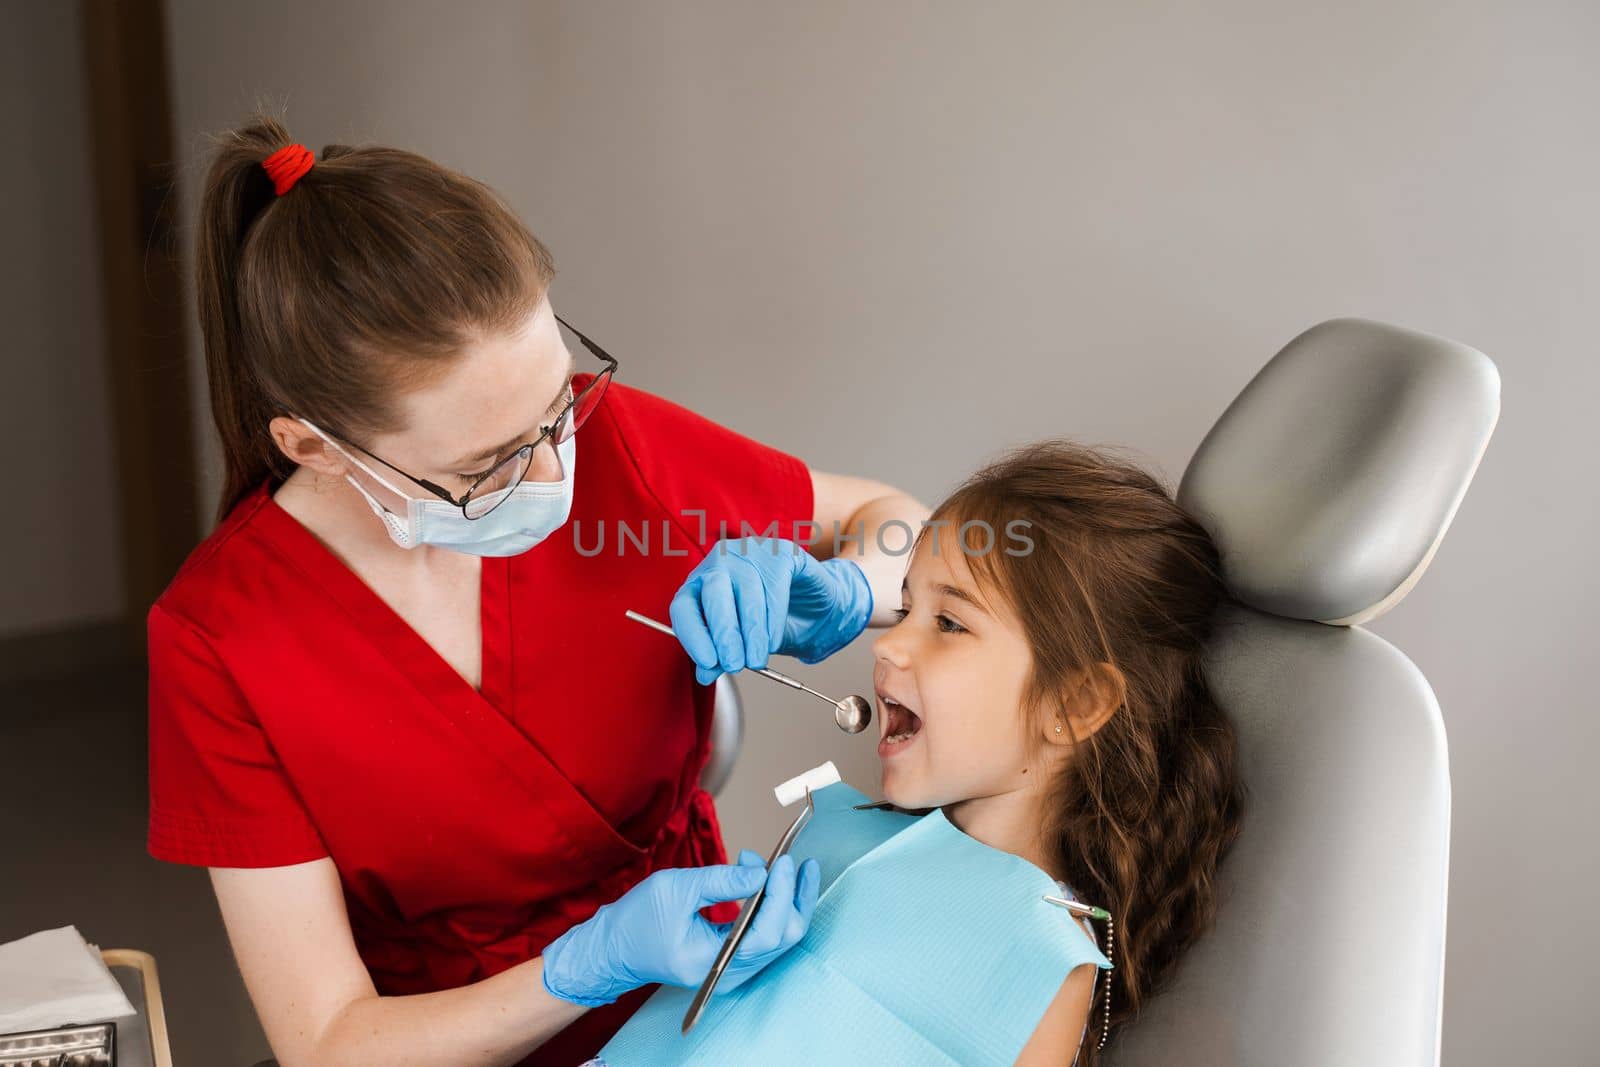 Pediatric dentist puts cotton swab in mouth of a child girl to install a photopolymer dental filling and treat teeth